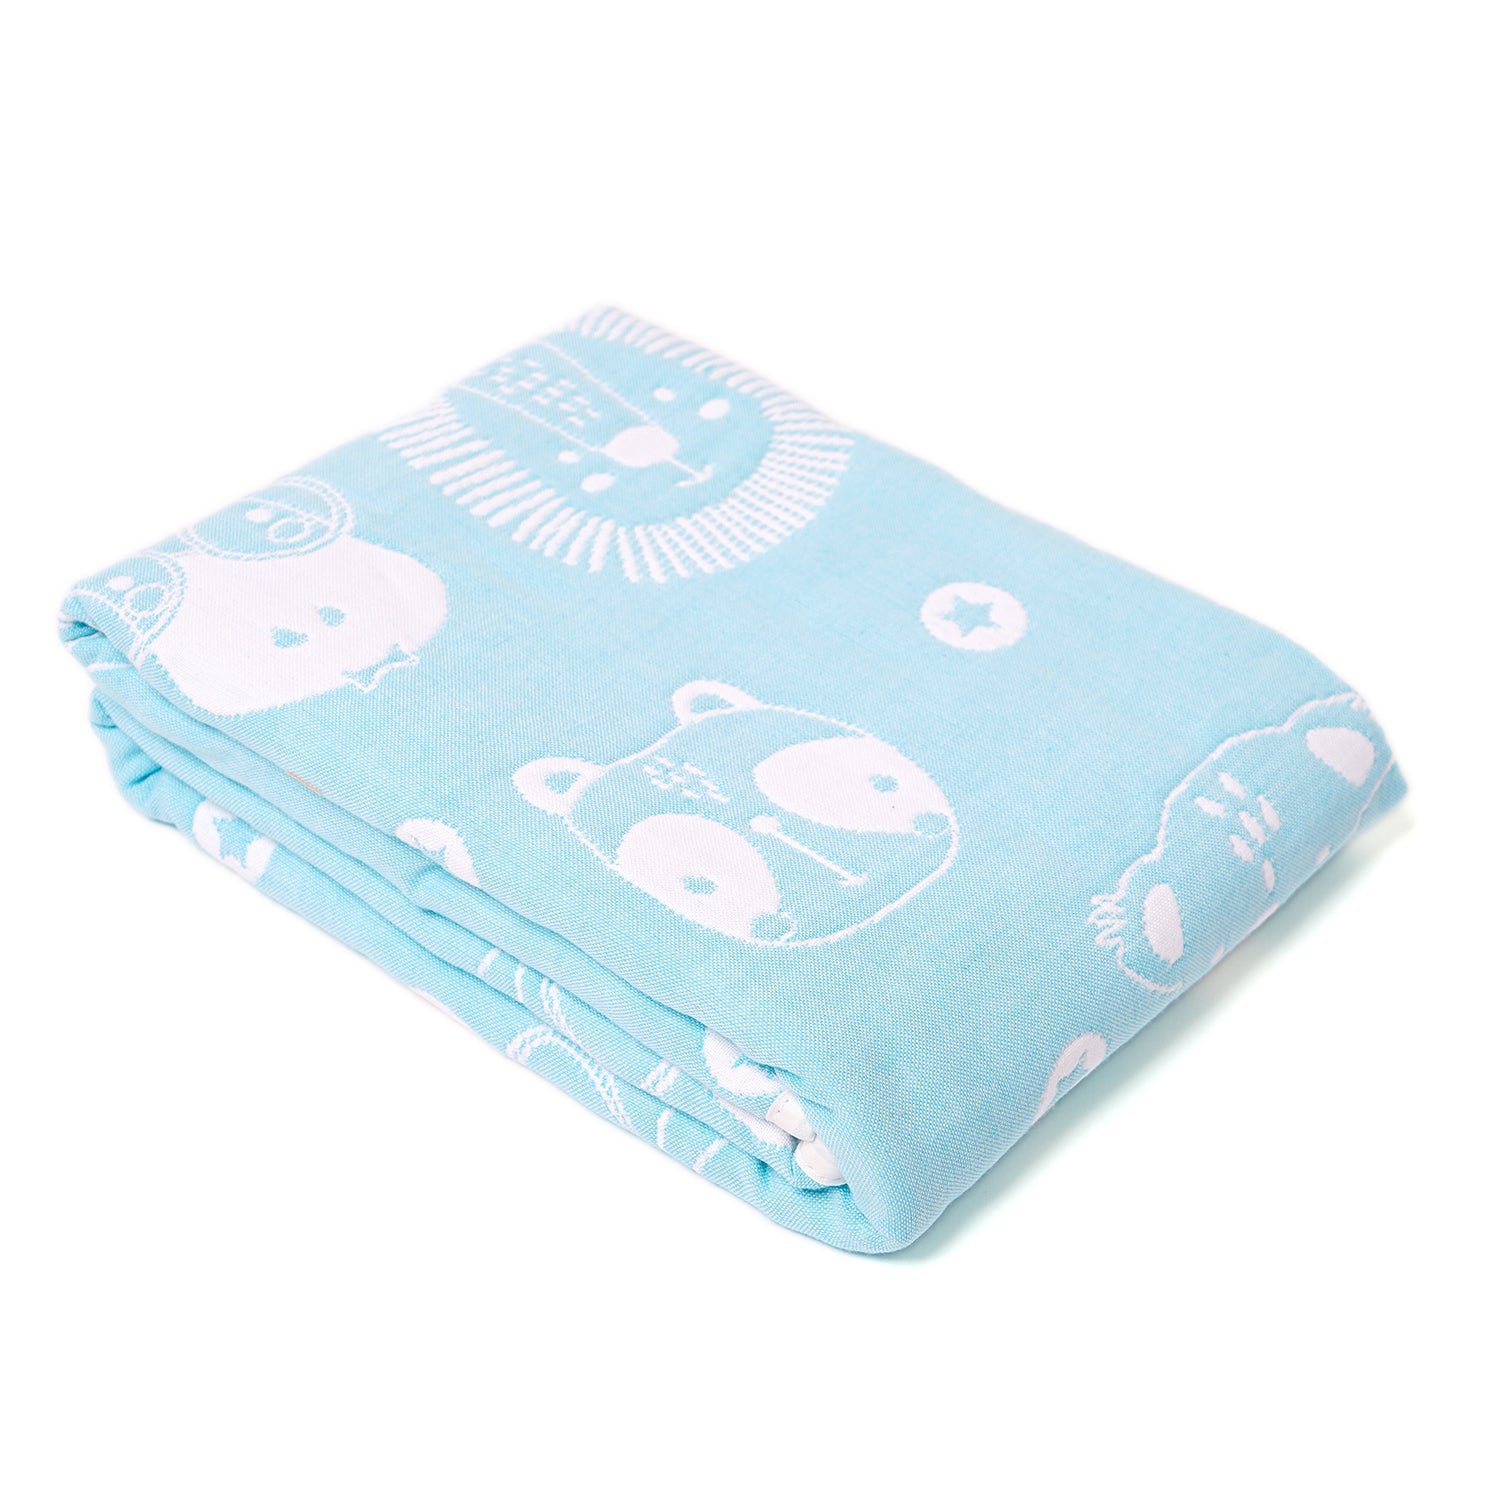 Organic Cotton Yarn Dyed Blanket - Party Animals - Blue